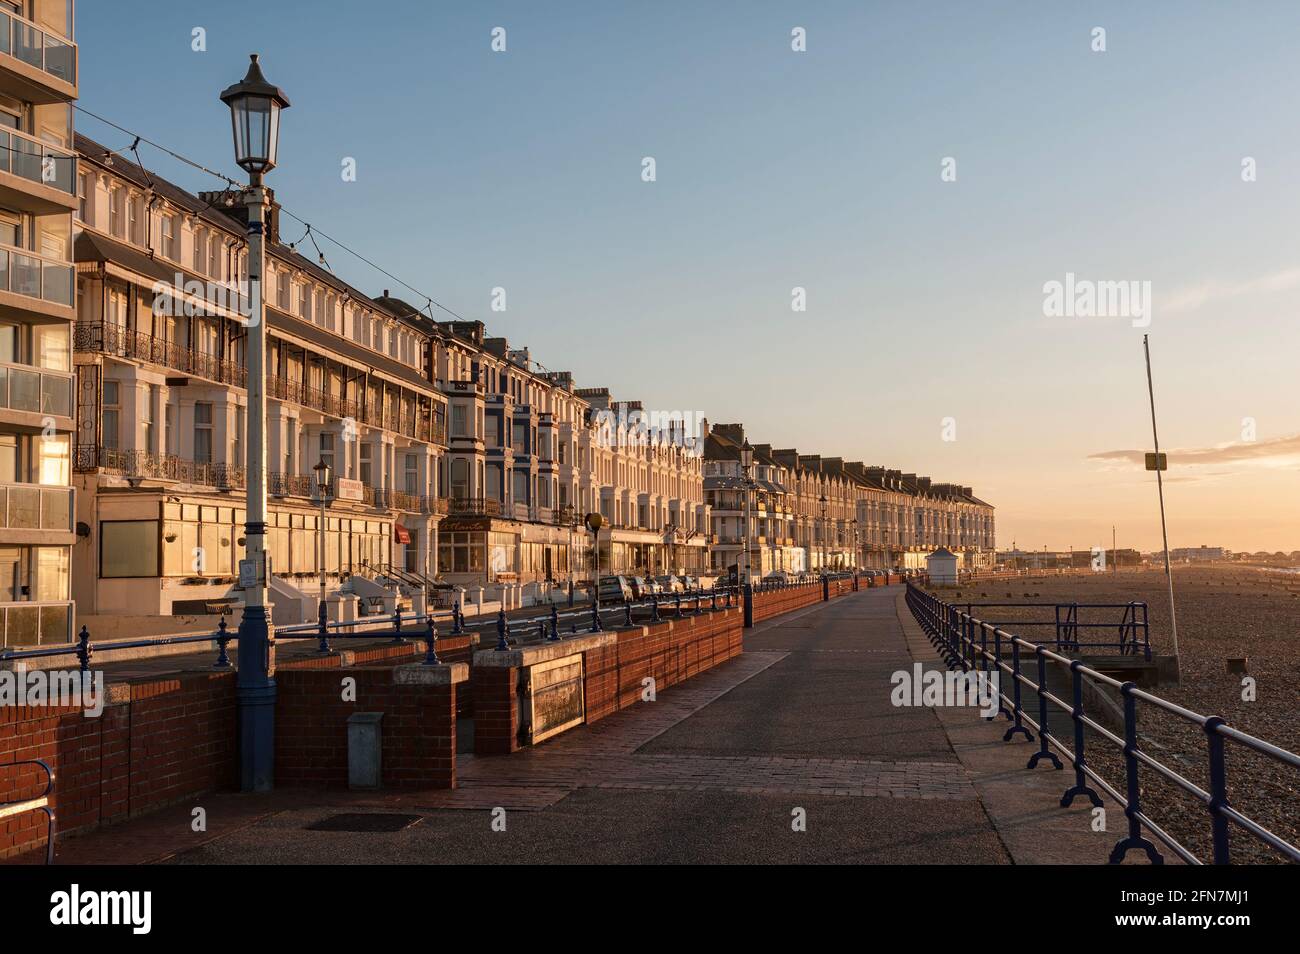 EASTBOURNE, EAST SUSSEX, UK - APRIL 30, 2012:  Sunlit guest houses and hotels along Grand Parade Stock Photo